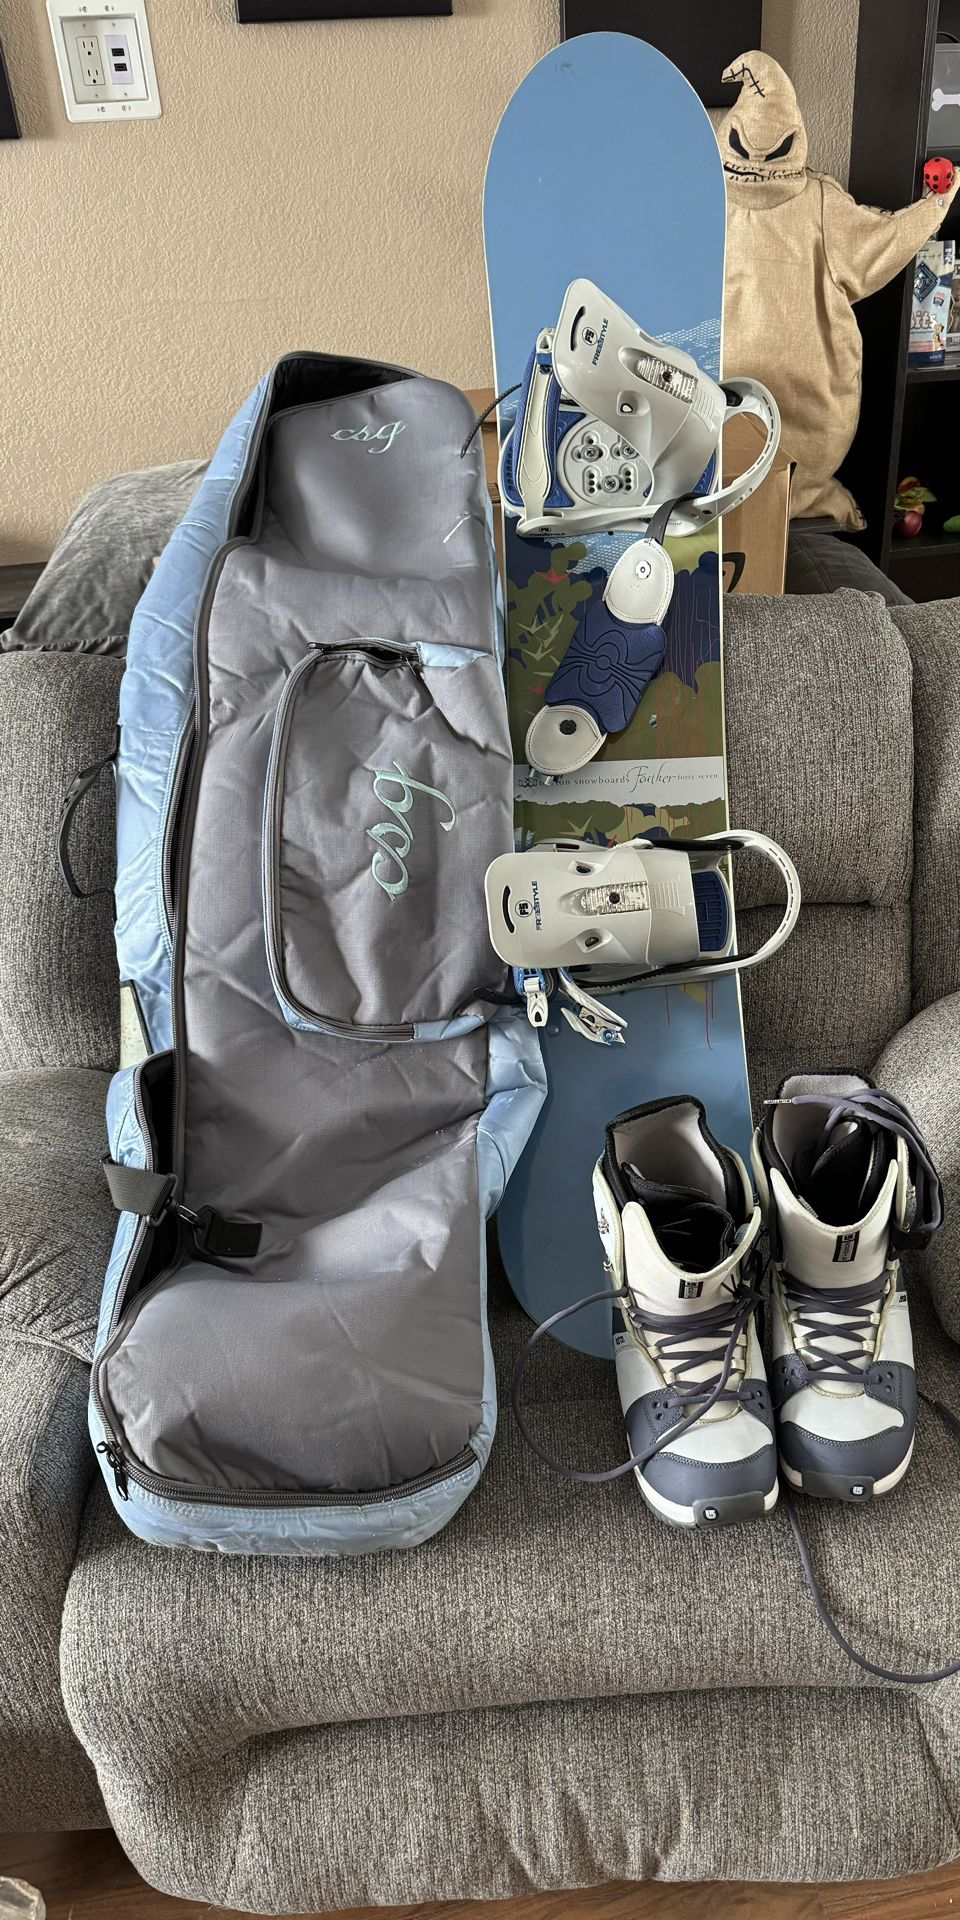 Burton feather 47 Snowboard With Boots